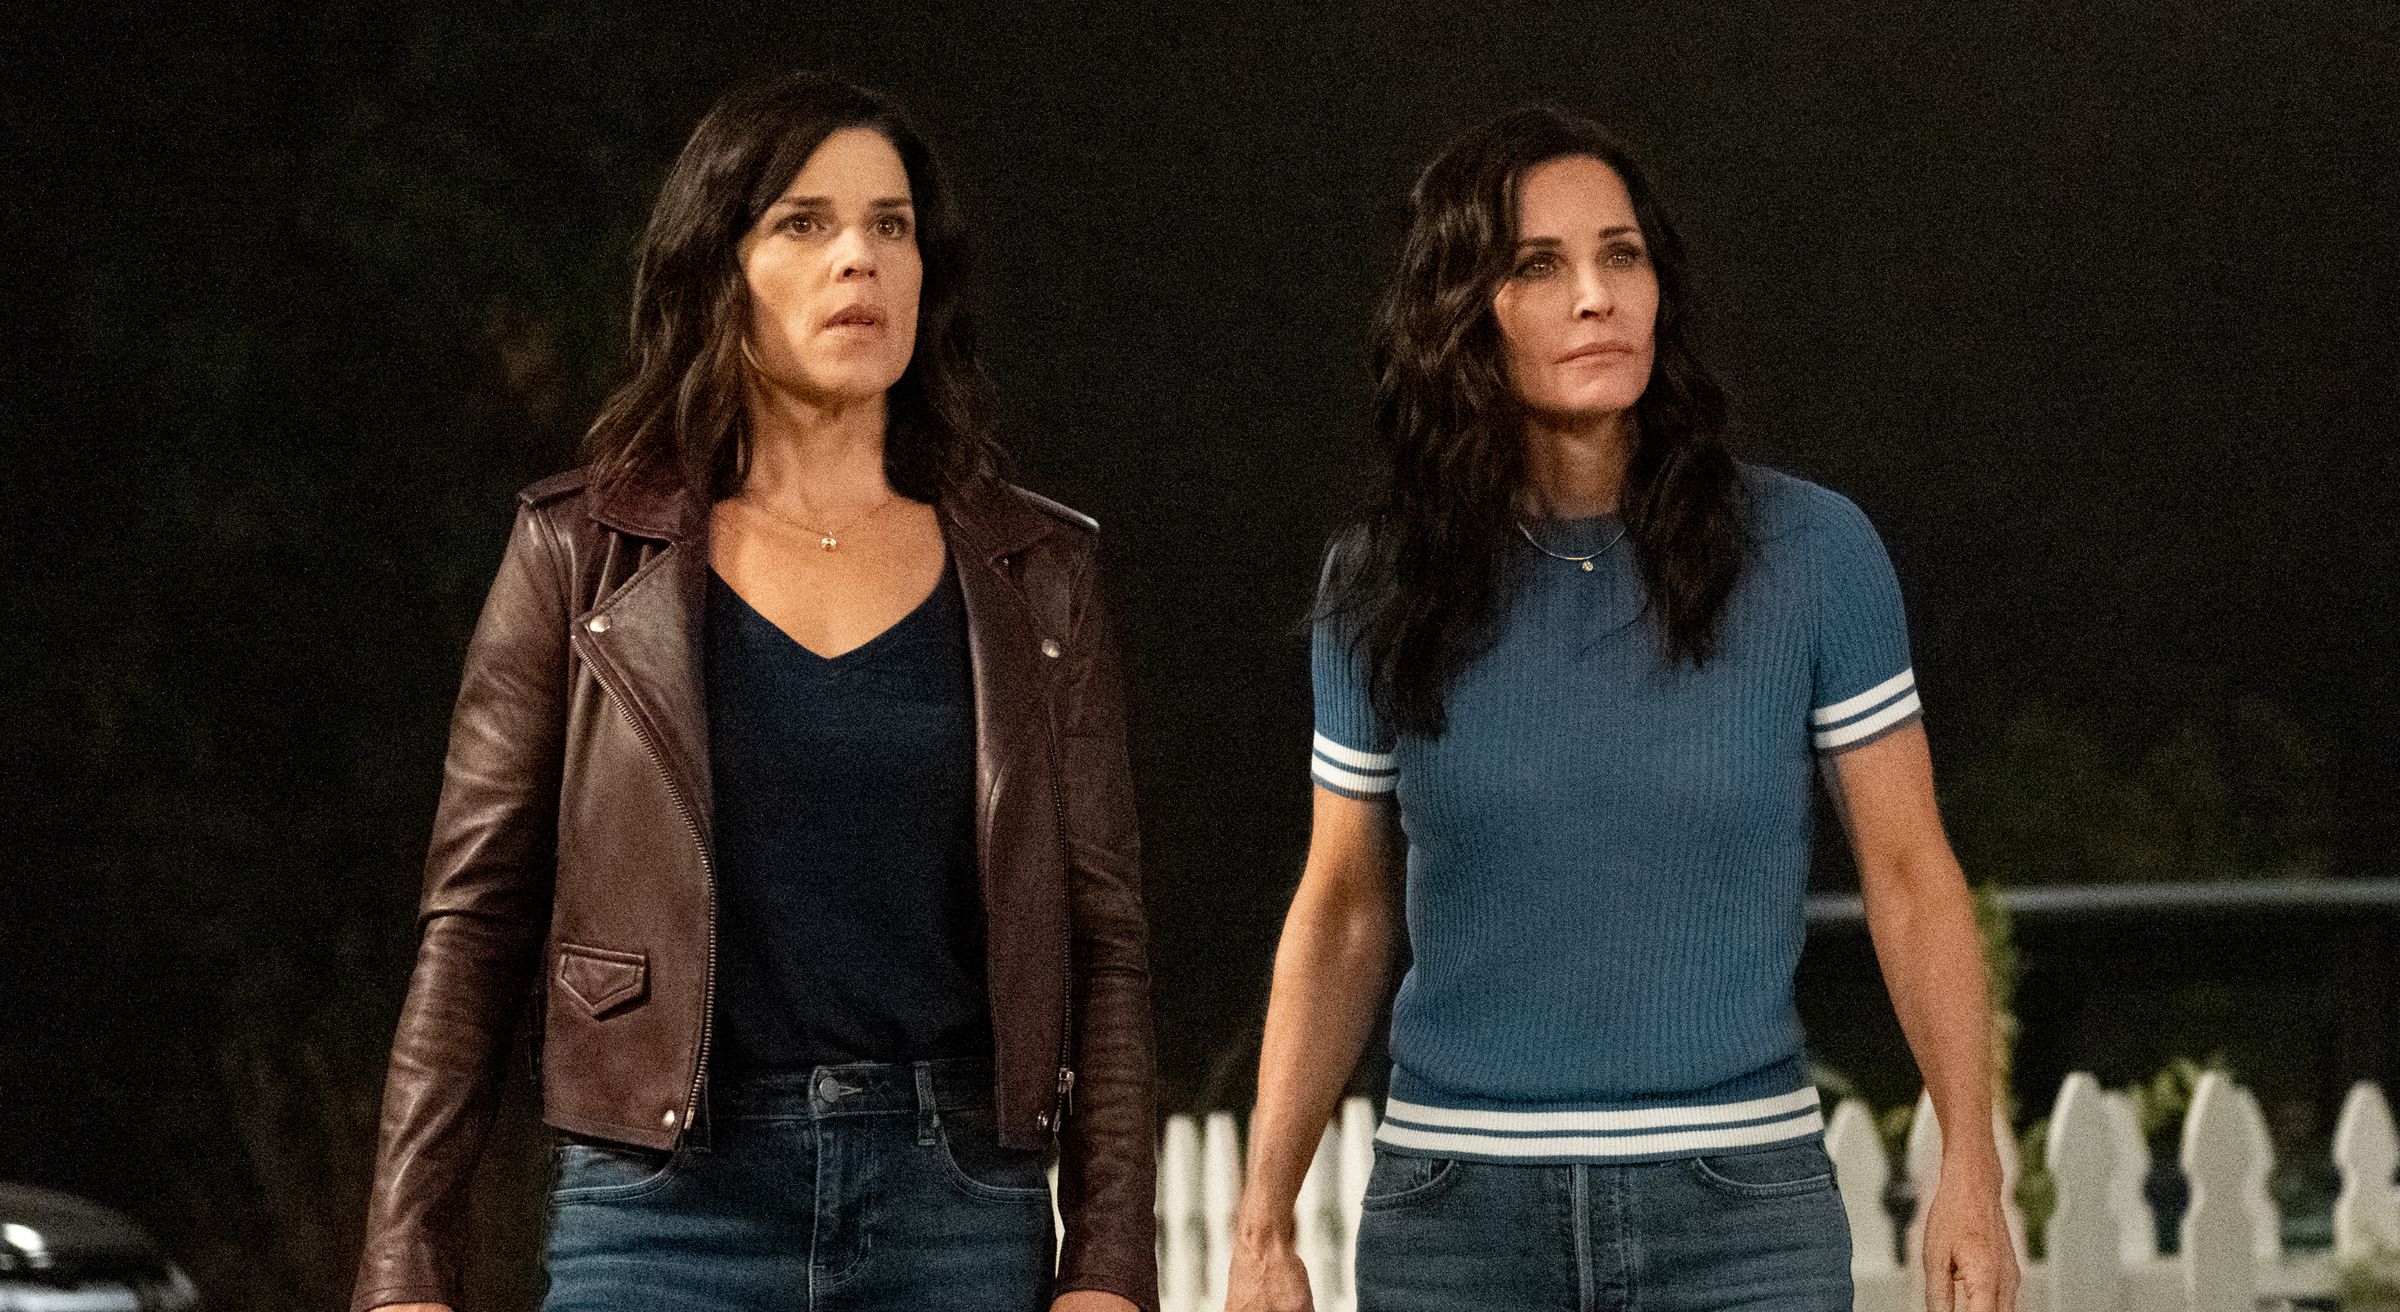 Neve Campbell and Cortney Cox reunite to battle a tech-savvy killer in the latest Scream installment.